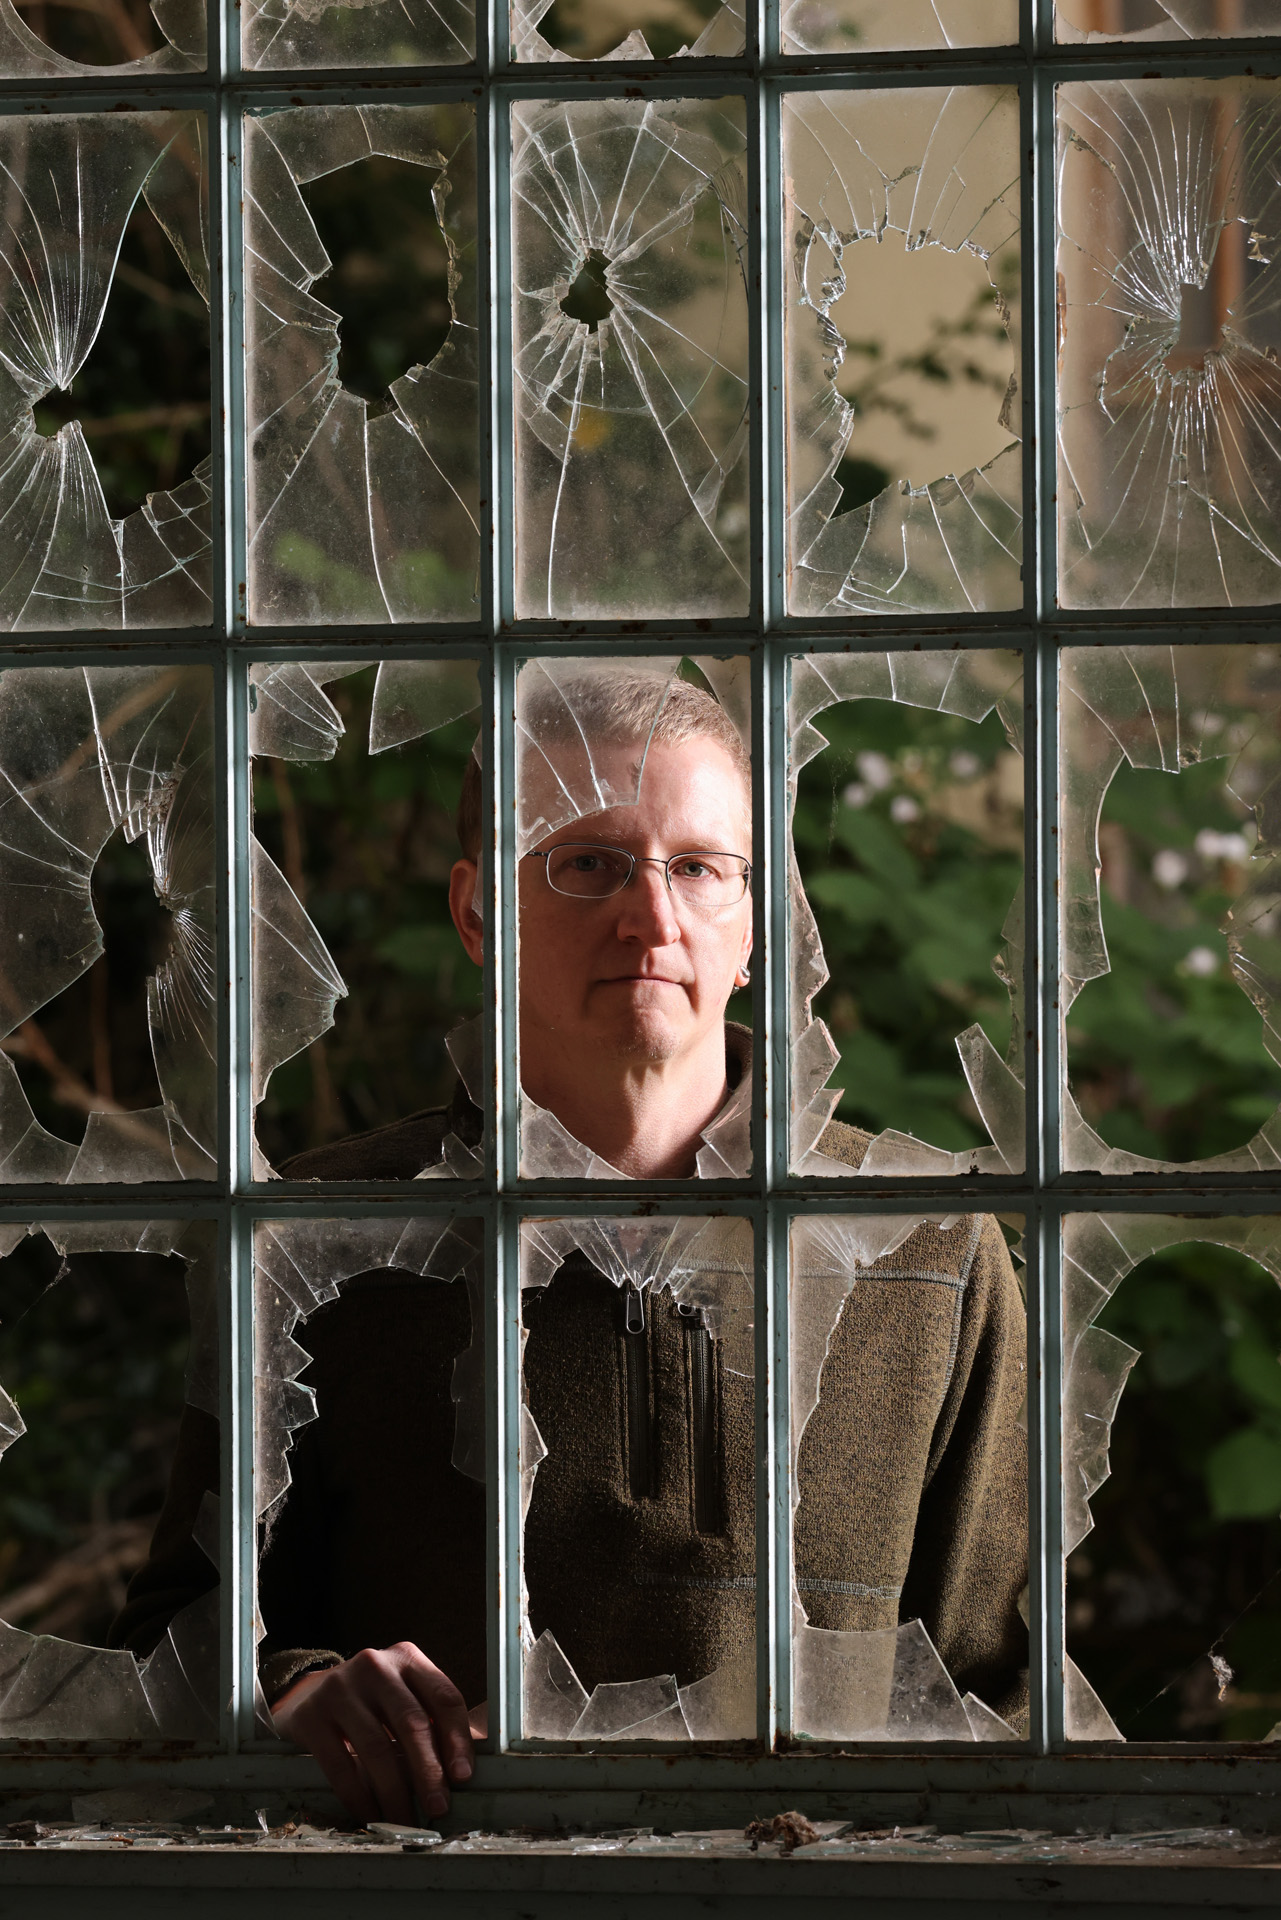 <p>Horne looks through the windows of the Gray building, also known as Ward 5, in Sedro-Woolley. Horne is a board member of the Sedro-Woolley Museum who researches Northern State Hospital’s history and burials. He hopes the buildings can be preserved. (Karen Ducey / The Seattle Times)</p>
